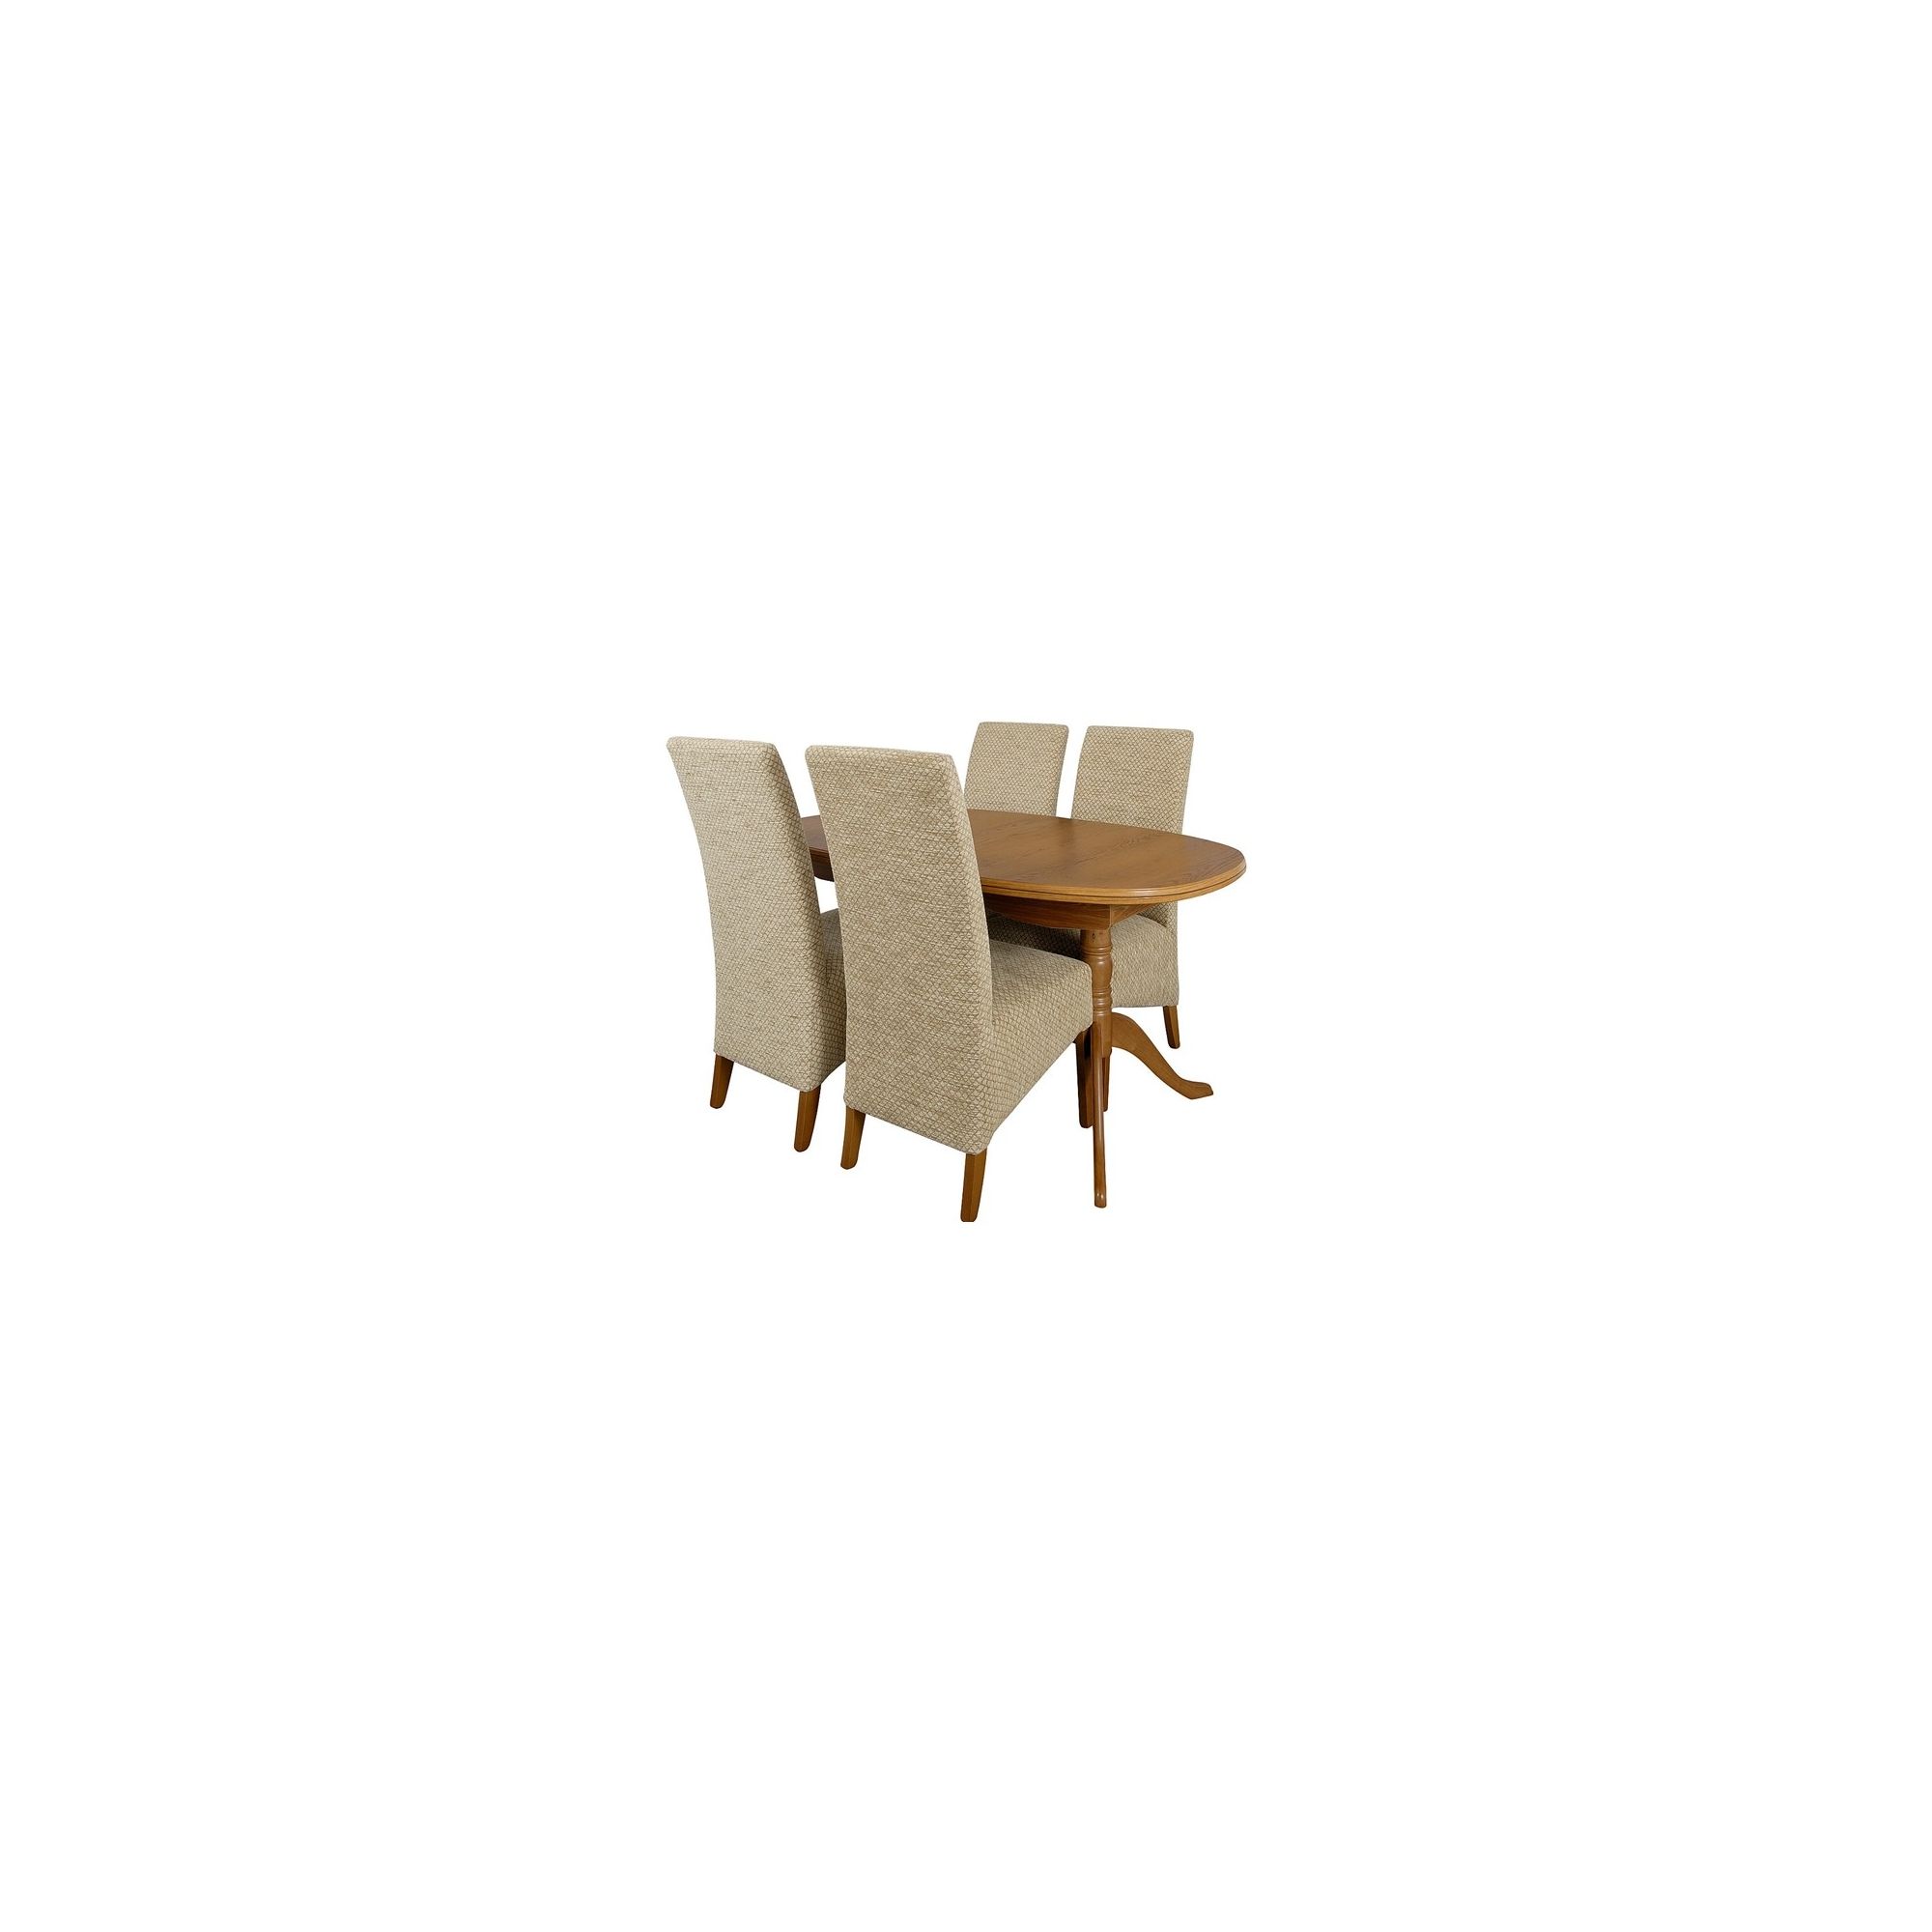 Caxton Canterbury 4 Chair Dining Set in Golden Chestnut at Tesco Direct